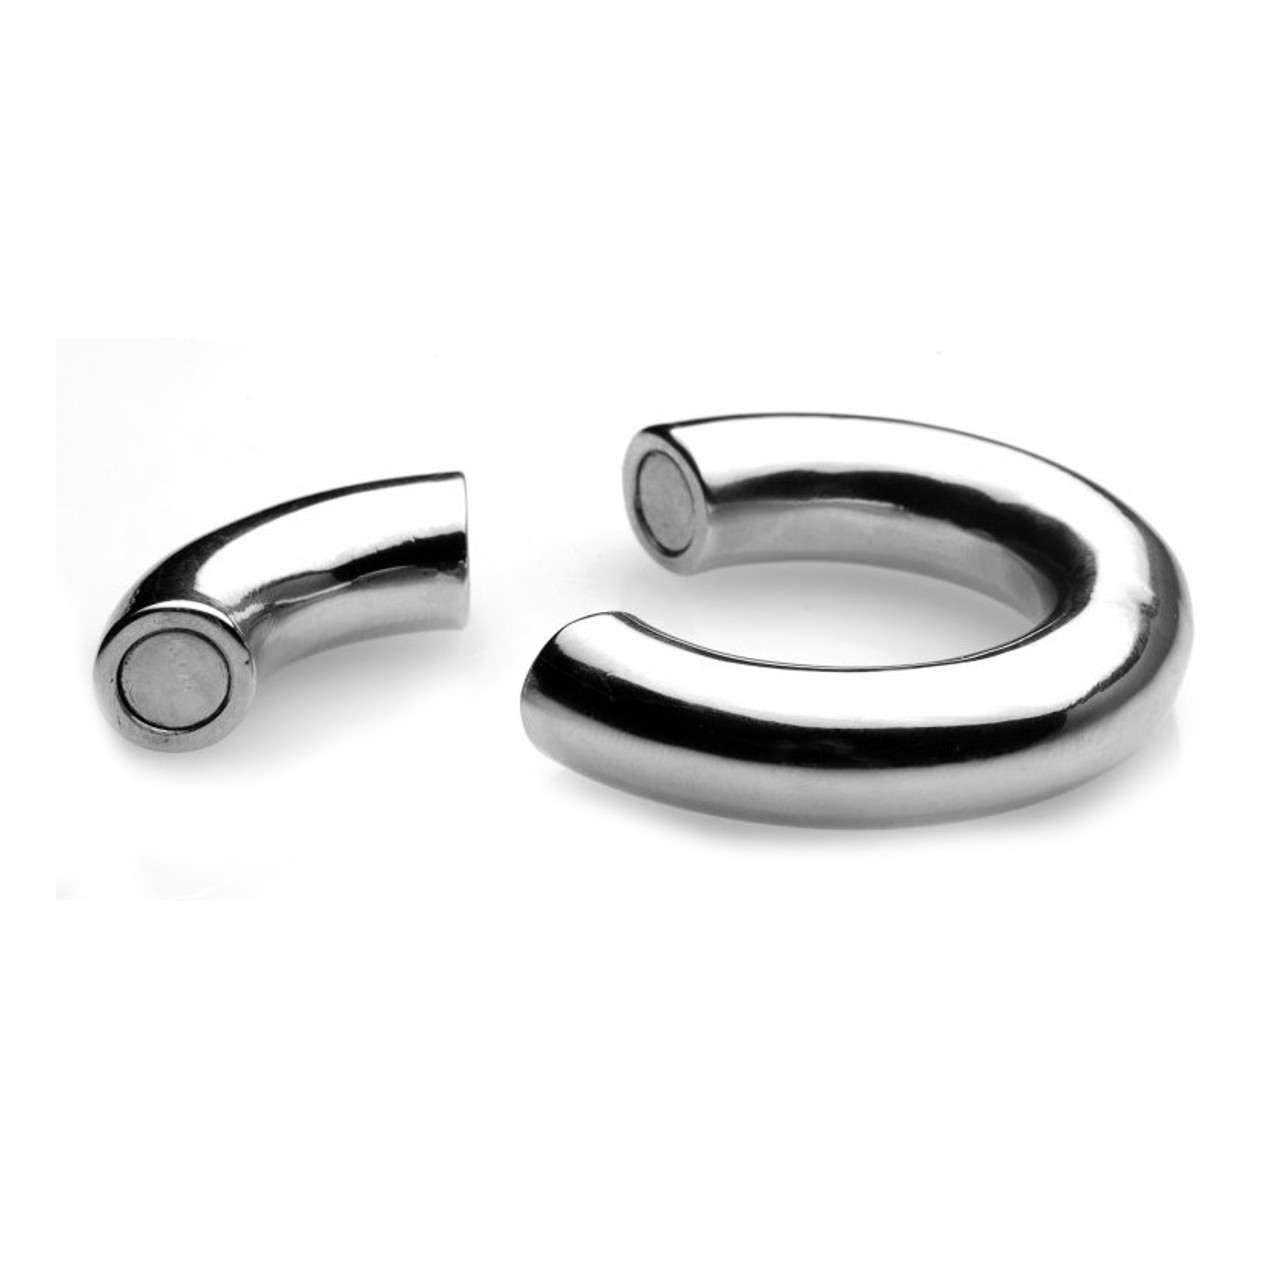 STAINLESS STEEL MAGNETIC BALL WEIGHT TESTICLE STRETCHER RING BONDAGE CBT 4  SIZE